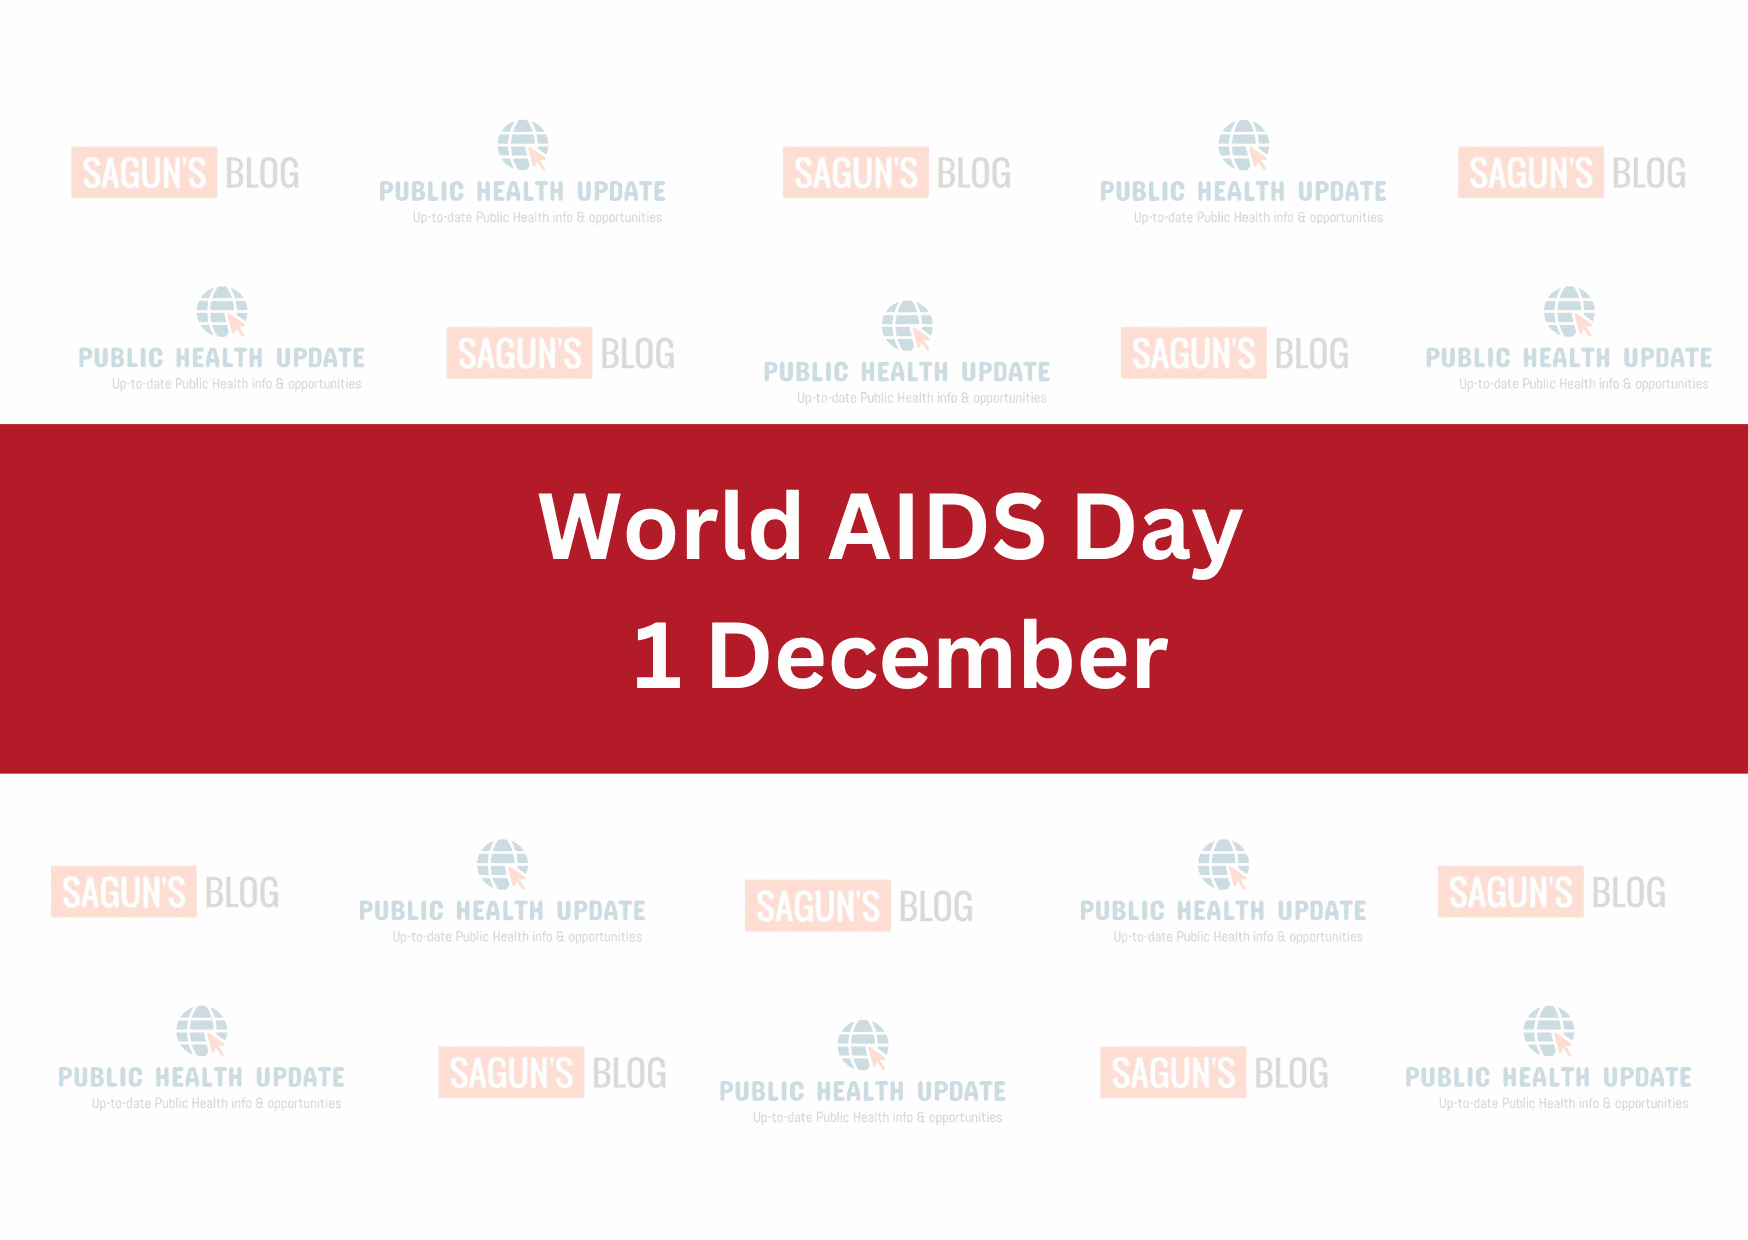 World AIDS Day takes place on 1 December